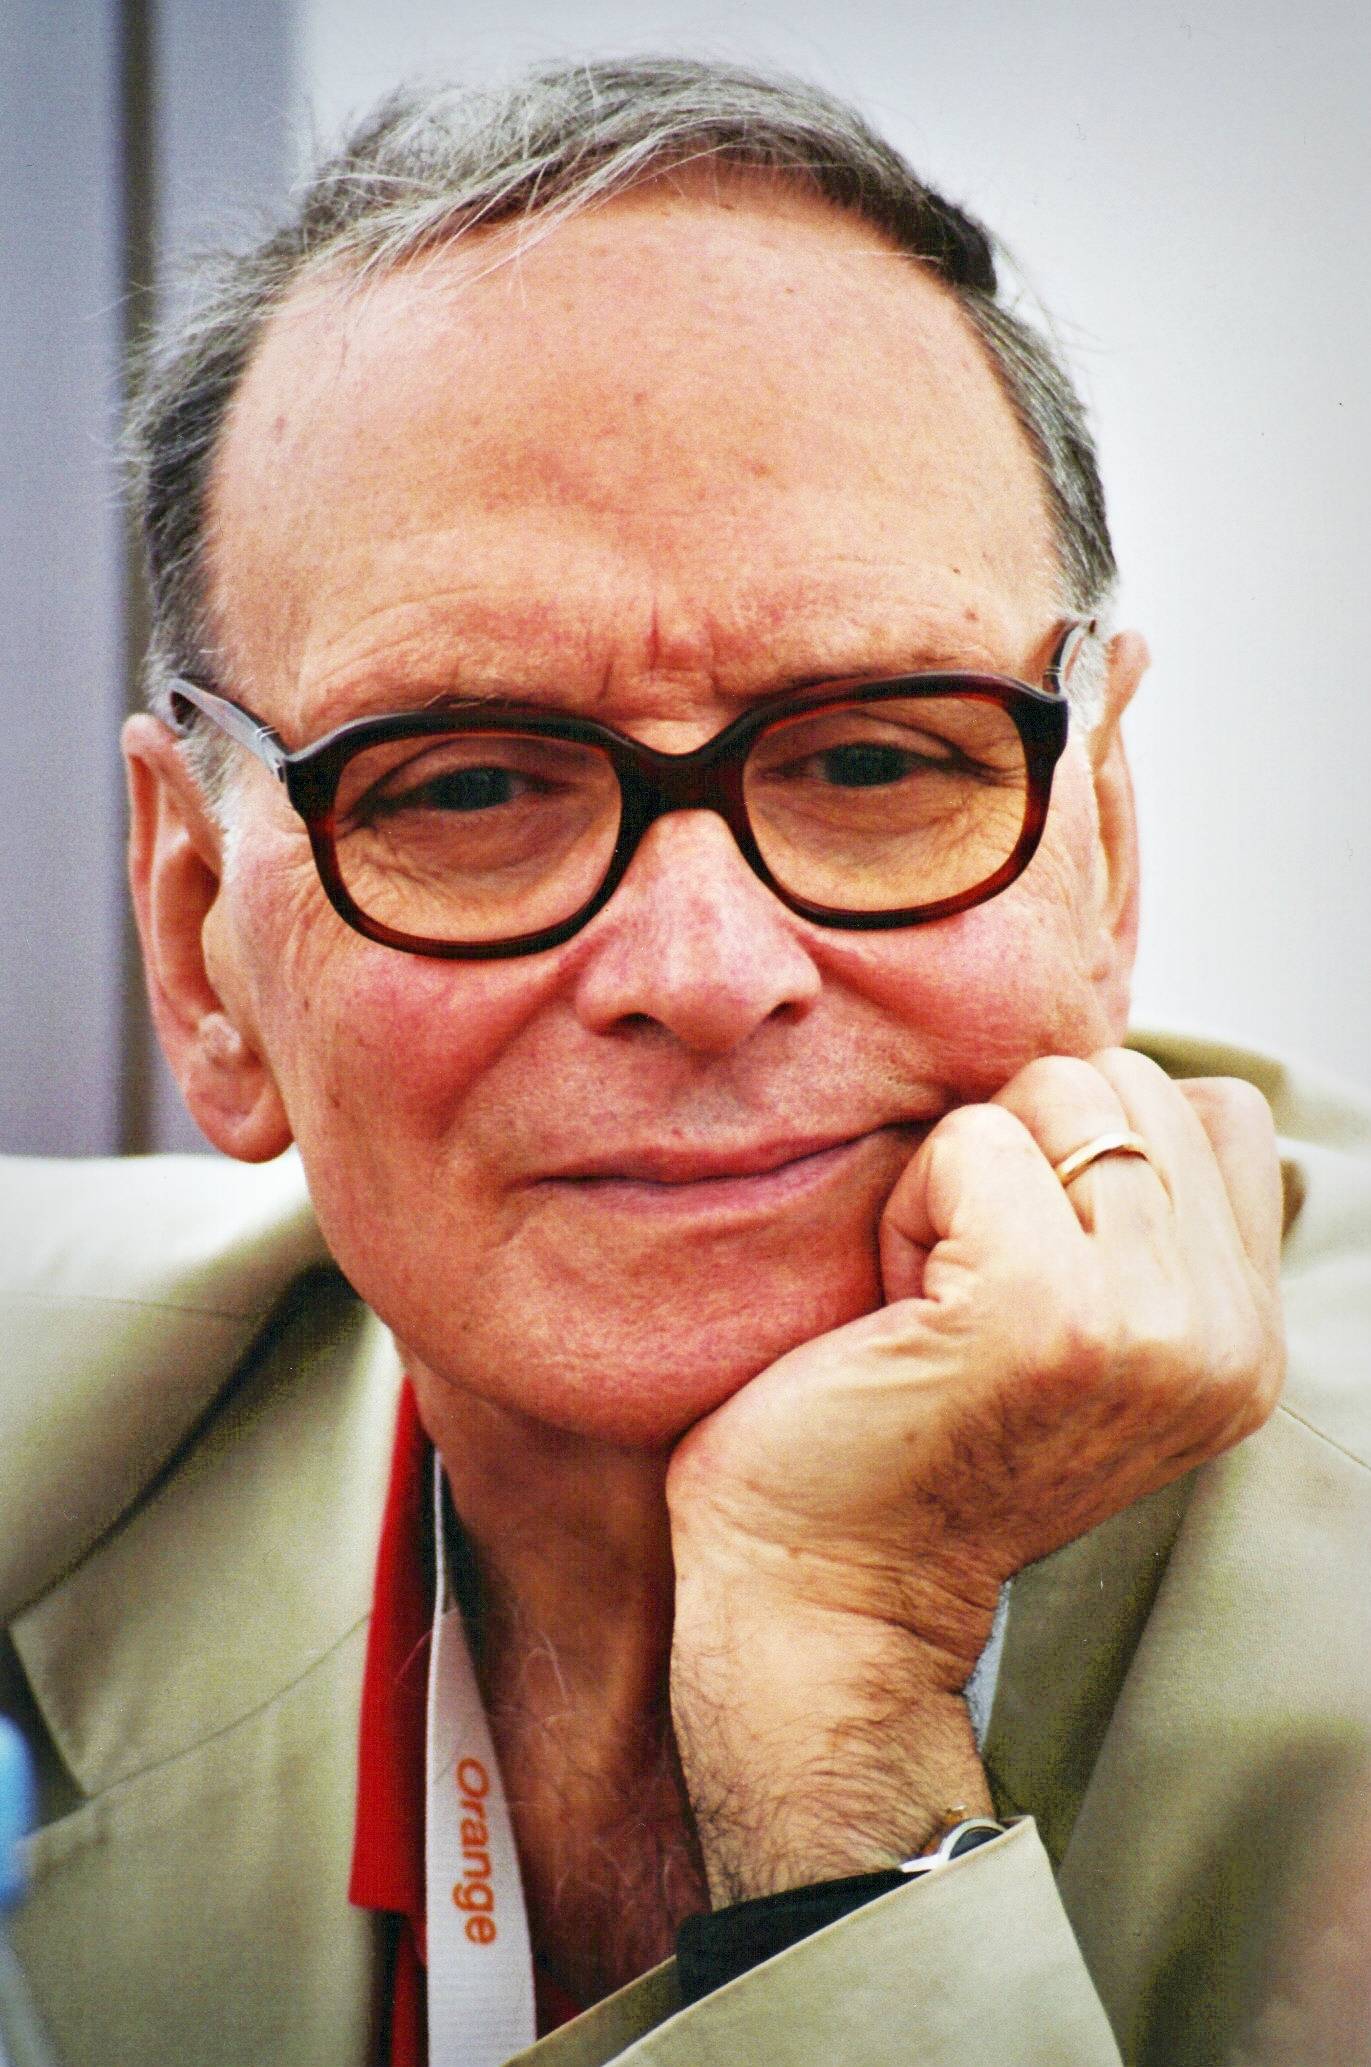 The memory of Morricone